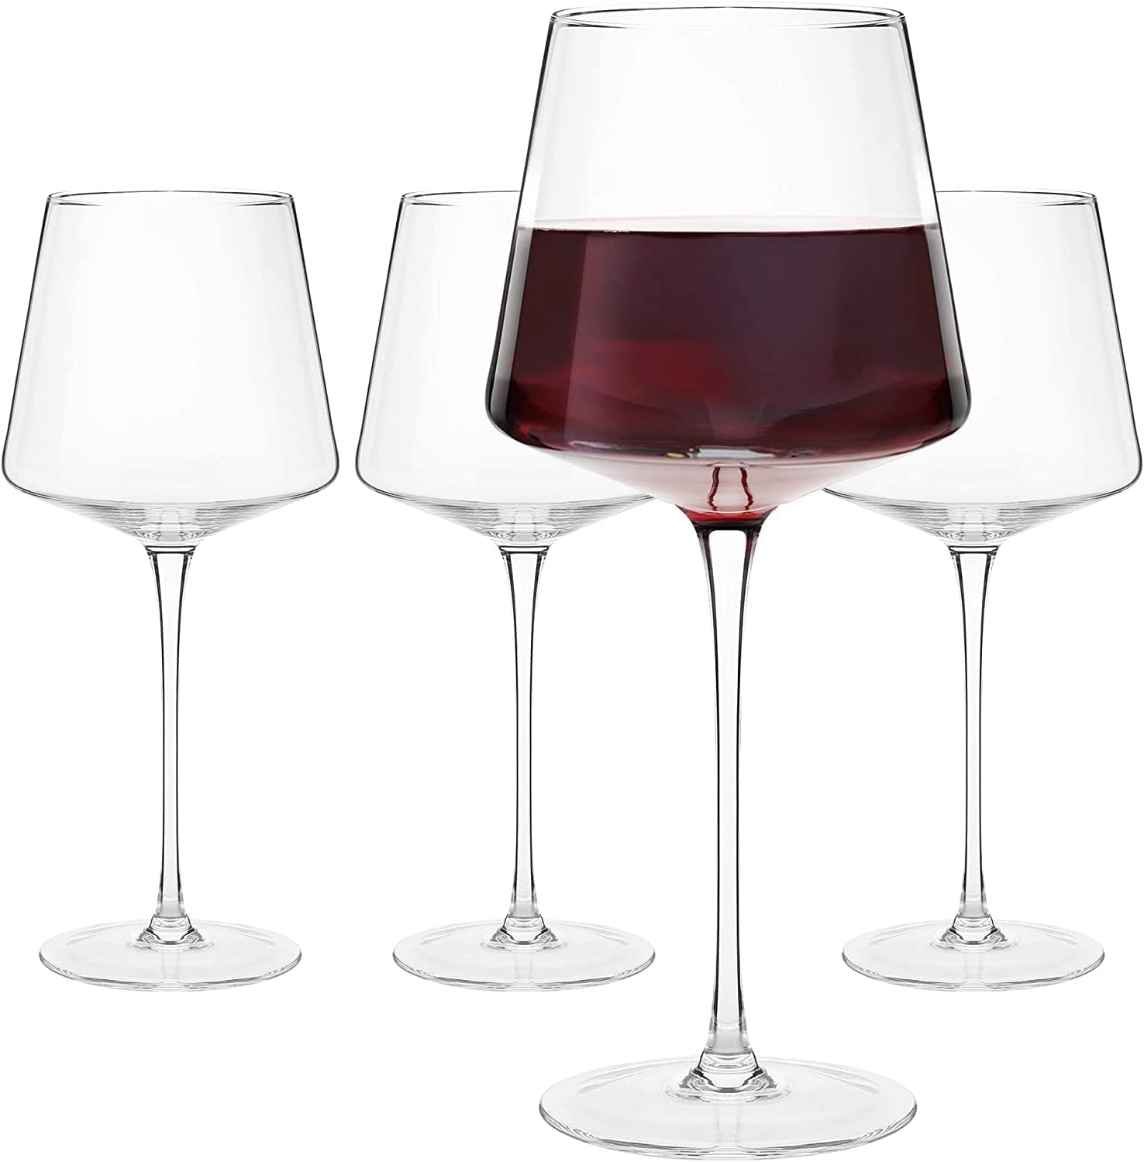 Elixir Glassware Red Wine Glasses - Set of 4 Hand Blown Large Wine Glasses  - Long Stem Wine Glasses, Premium Crystal - 22oz, Clear